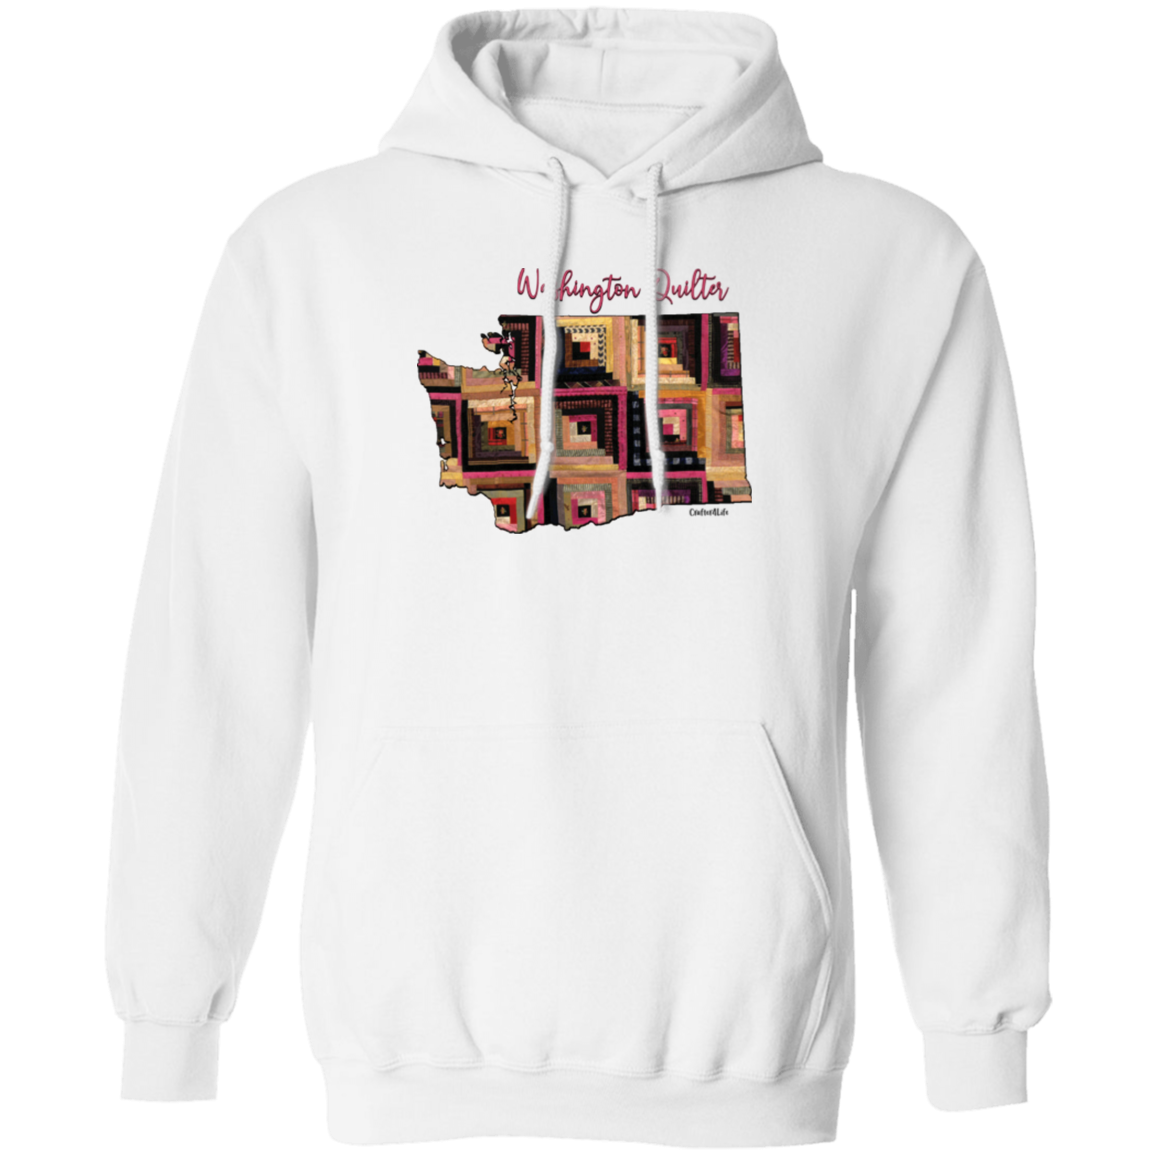 Washington Quilter Pullover Hoodie, Gift for Quilting Friends and Family